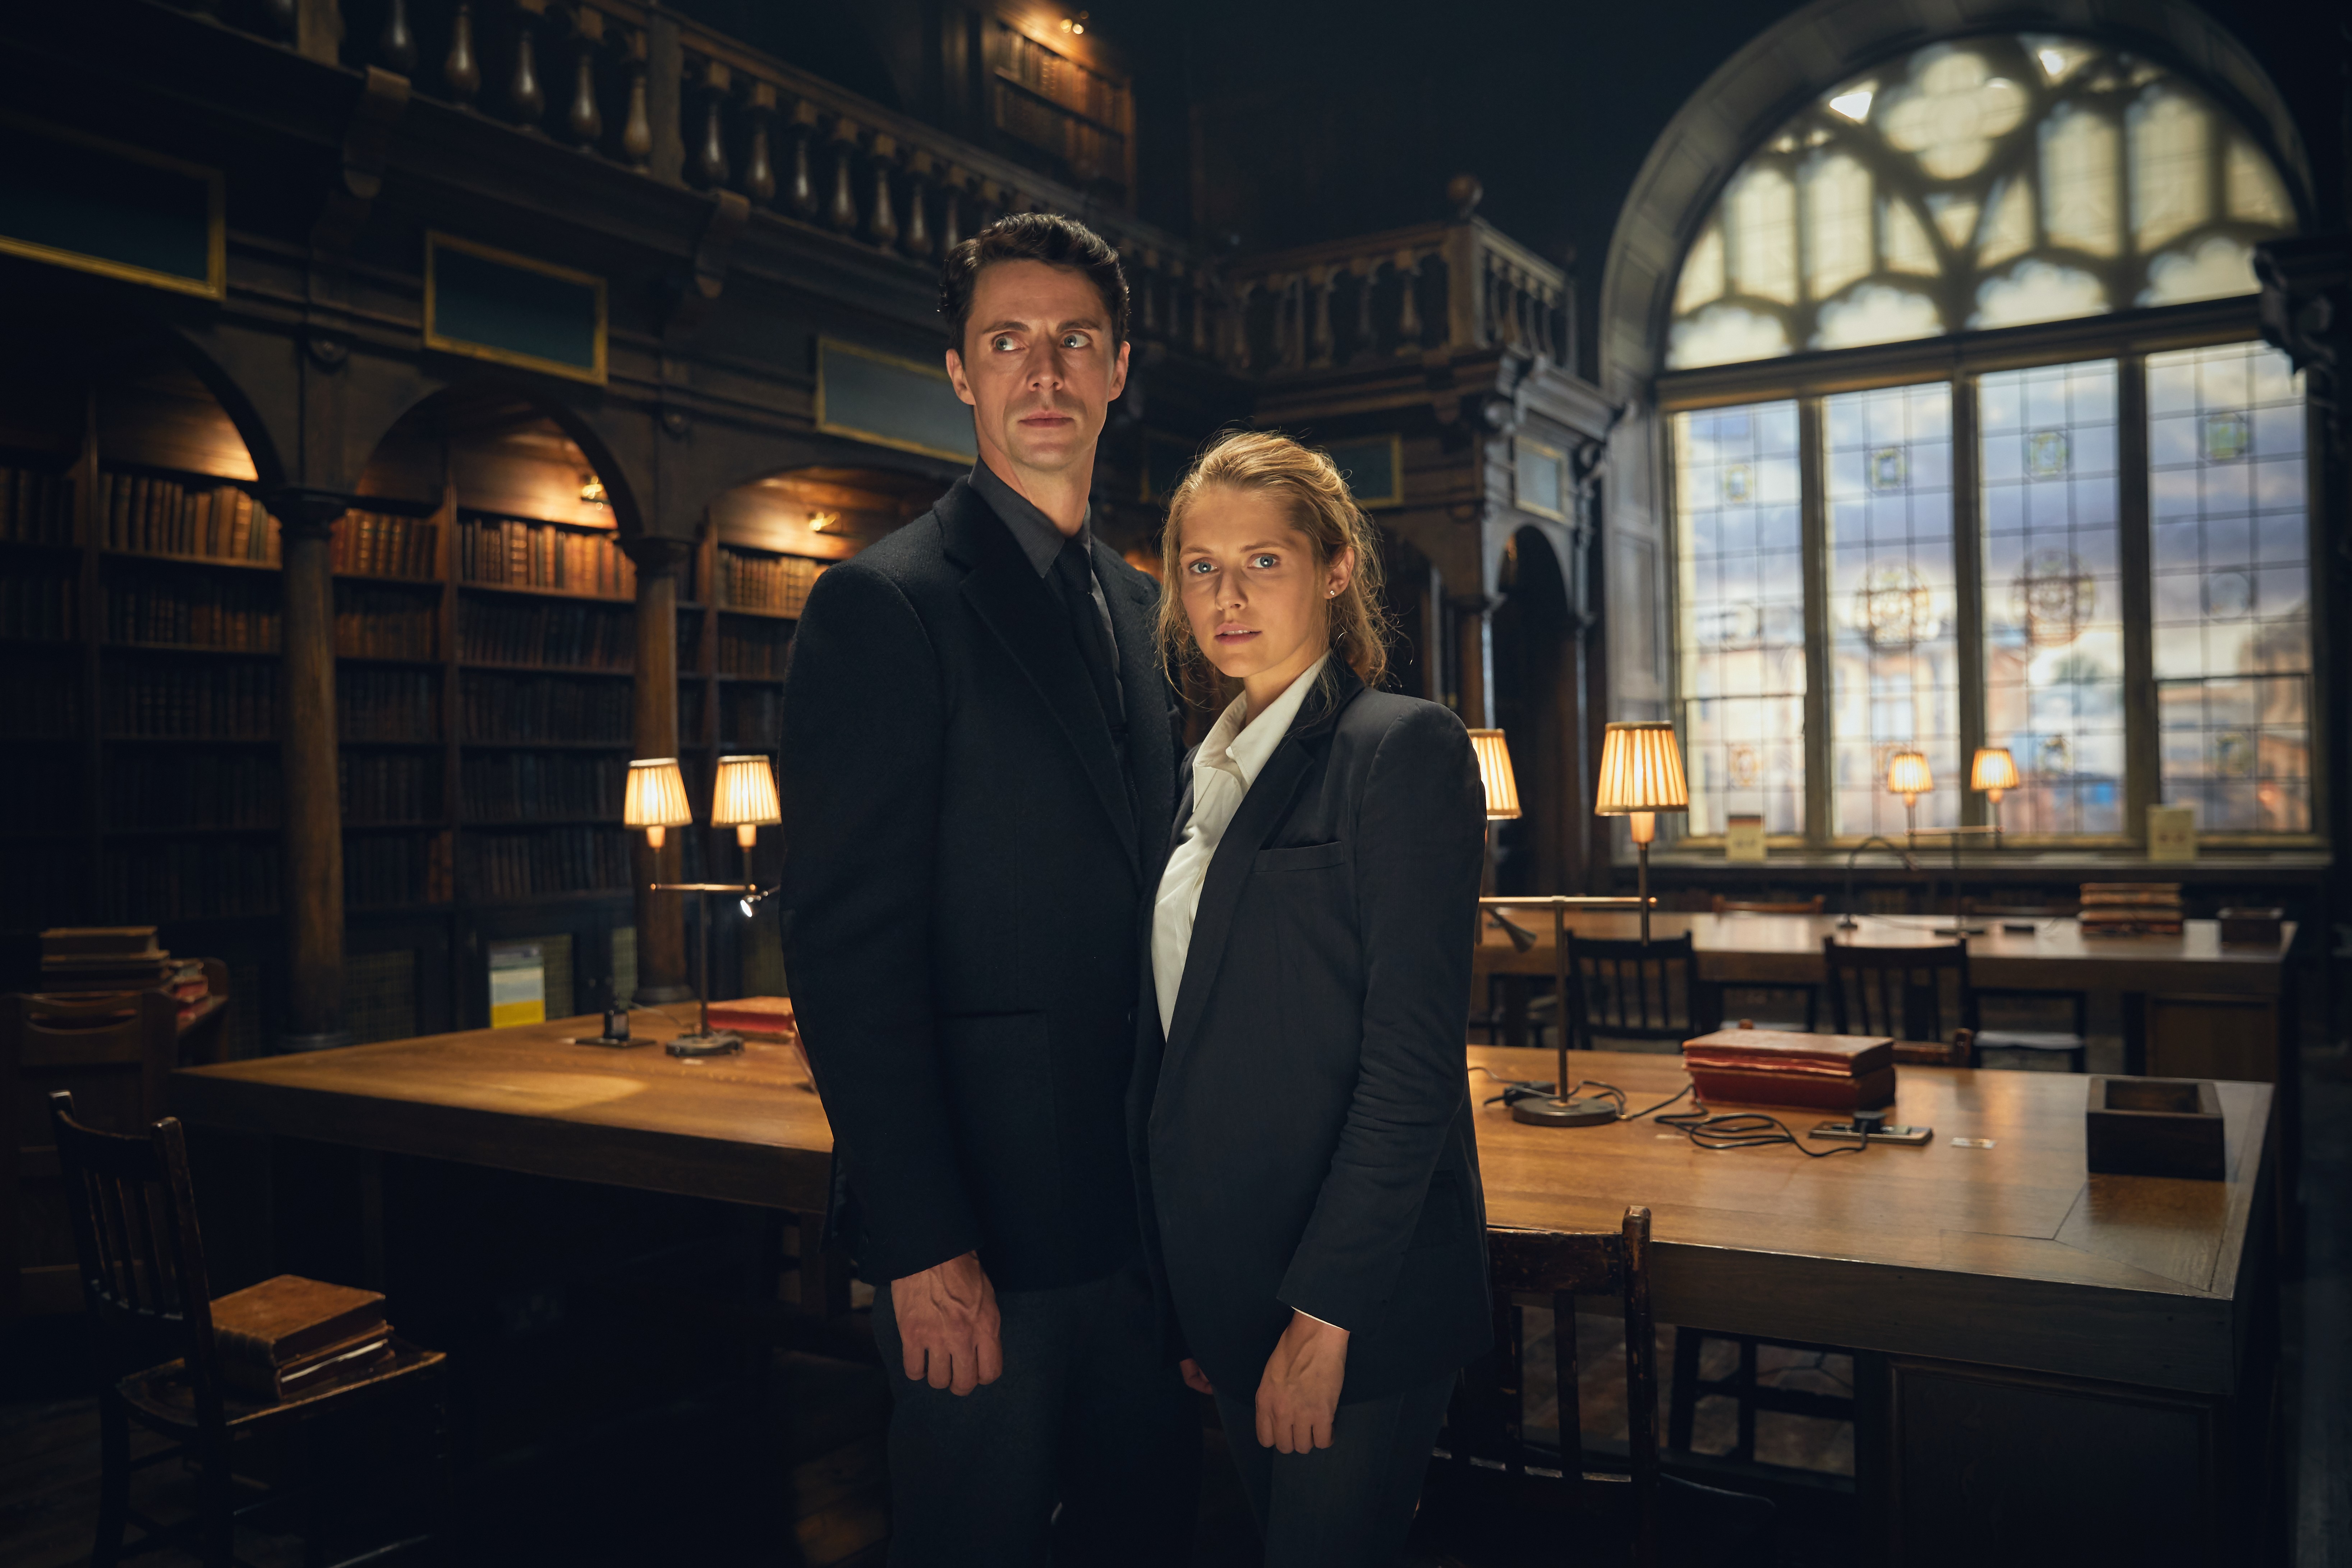 a discovery of witches, tv show, matthew goode, teresa palmer